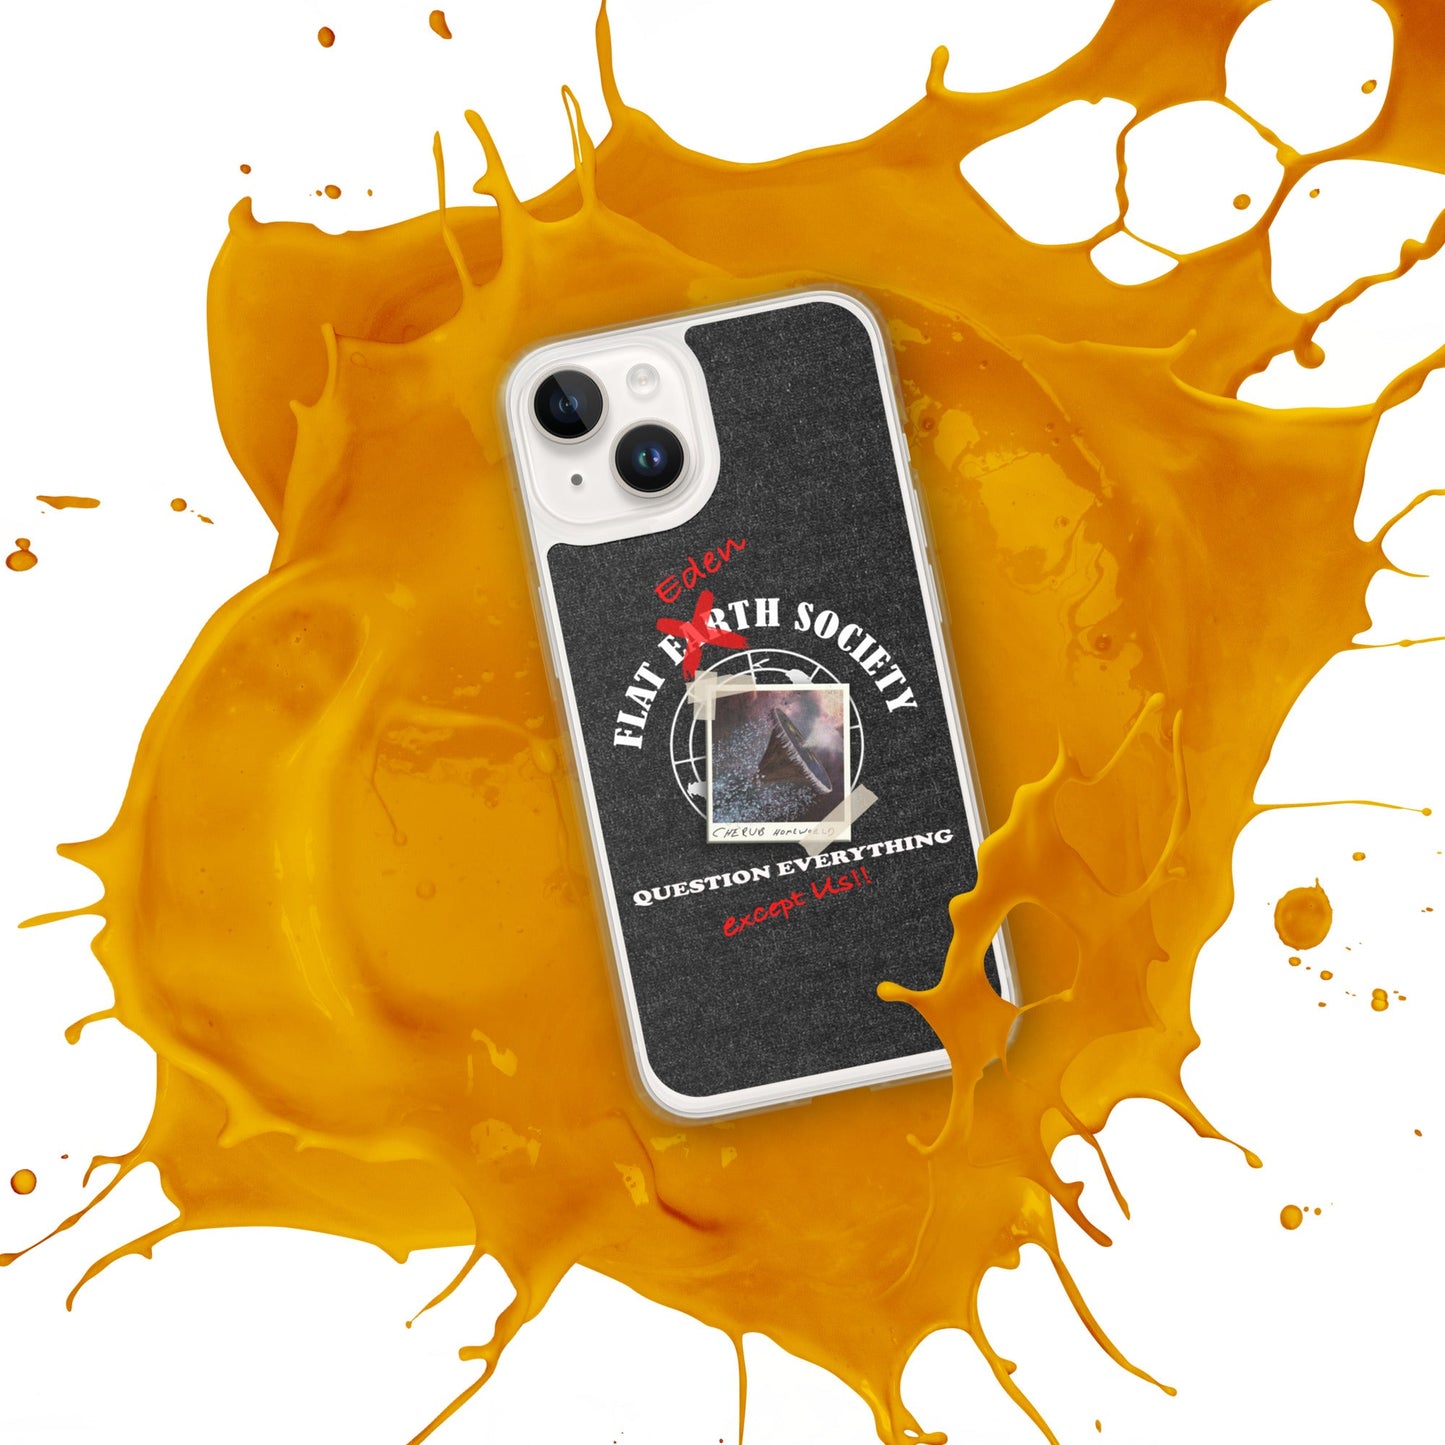 iPhone Case | Intergalactic Space Force 2 | Flat Eden Society - Spectral Ink Shop - Mobile Phone Cases -9780728_13427